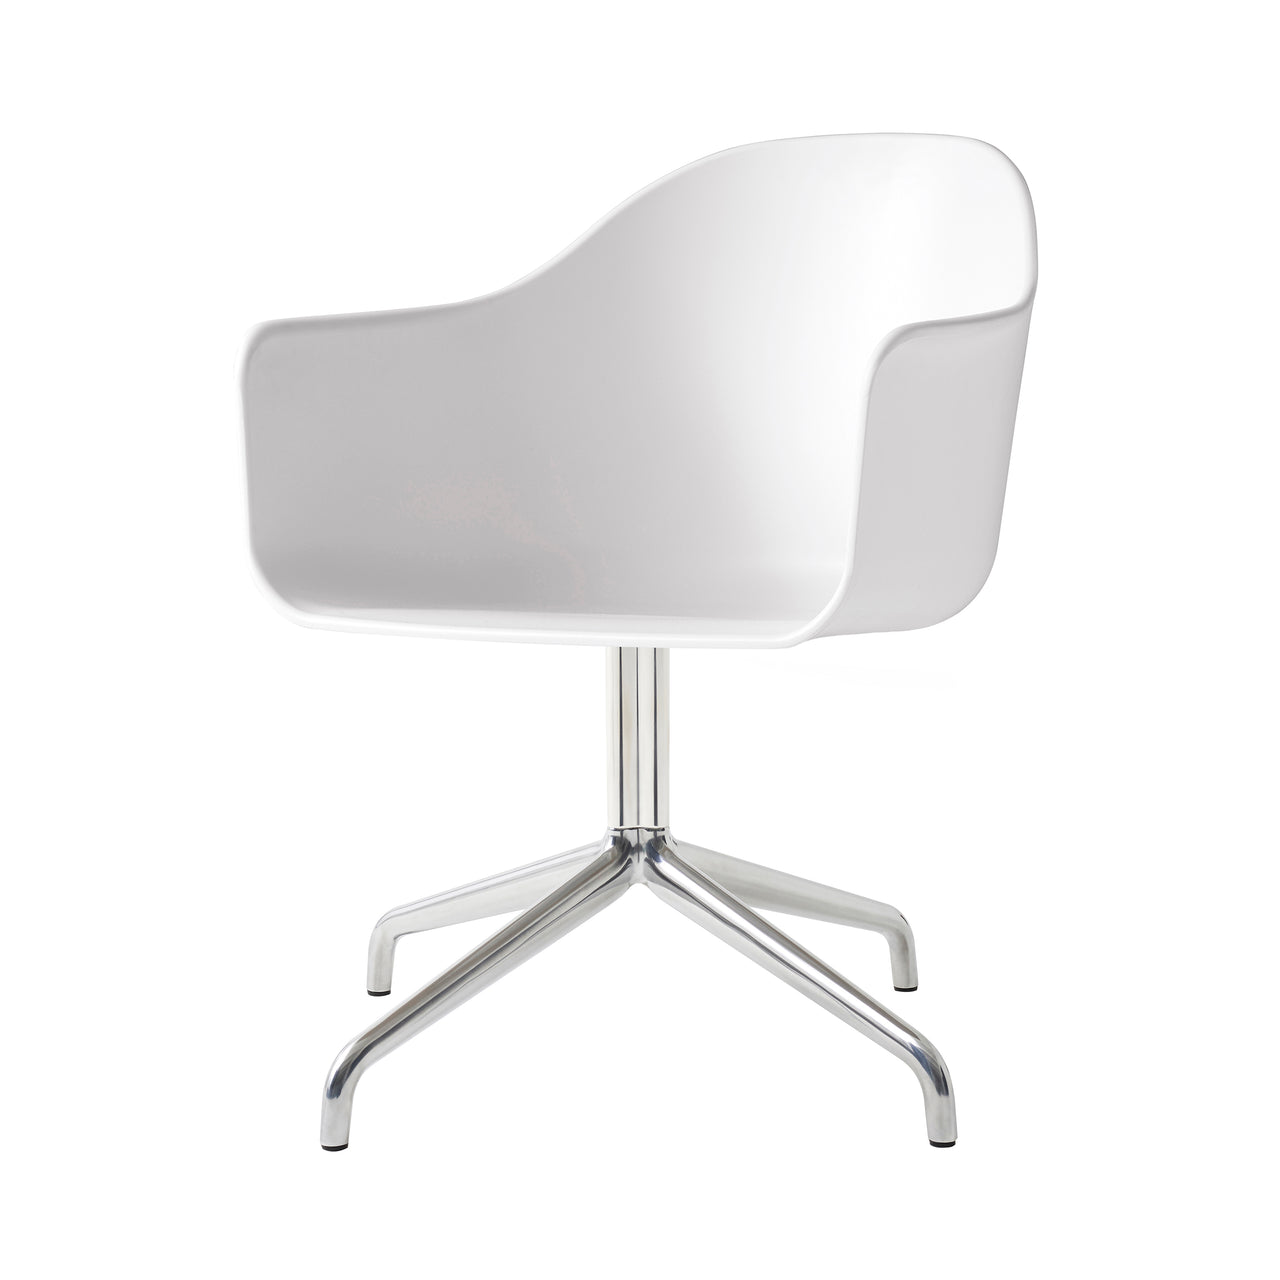 Harbour Dining Chair: Star Base + Polished Aluminum + White